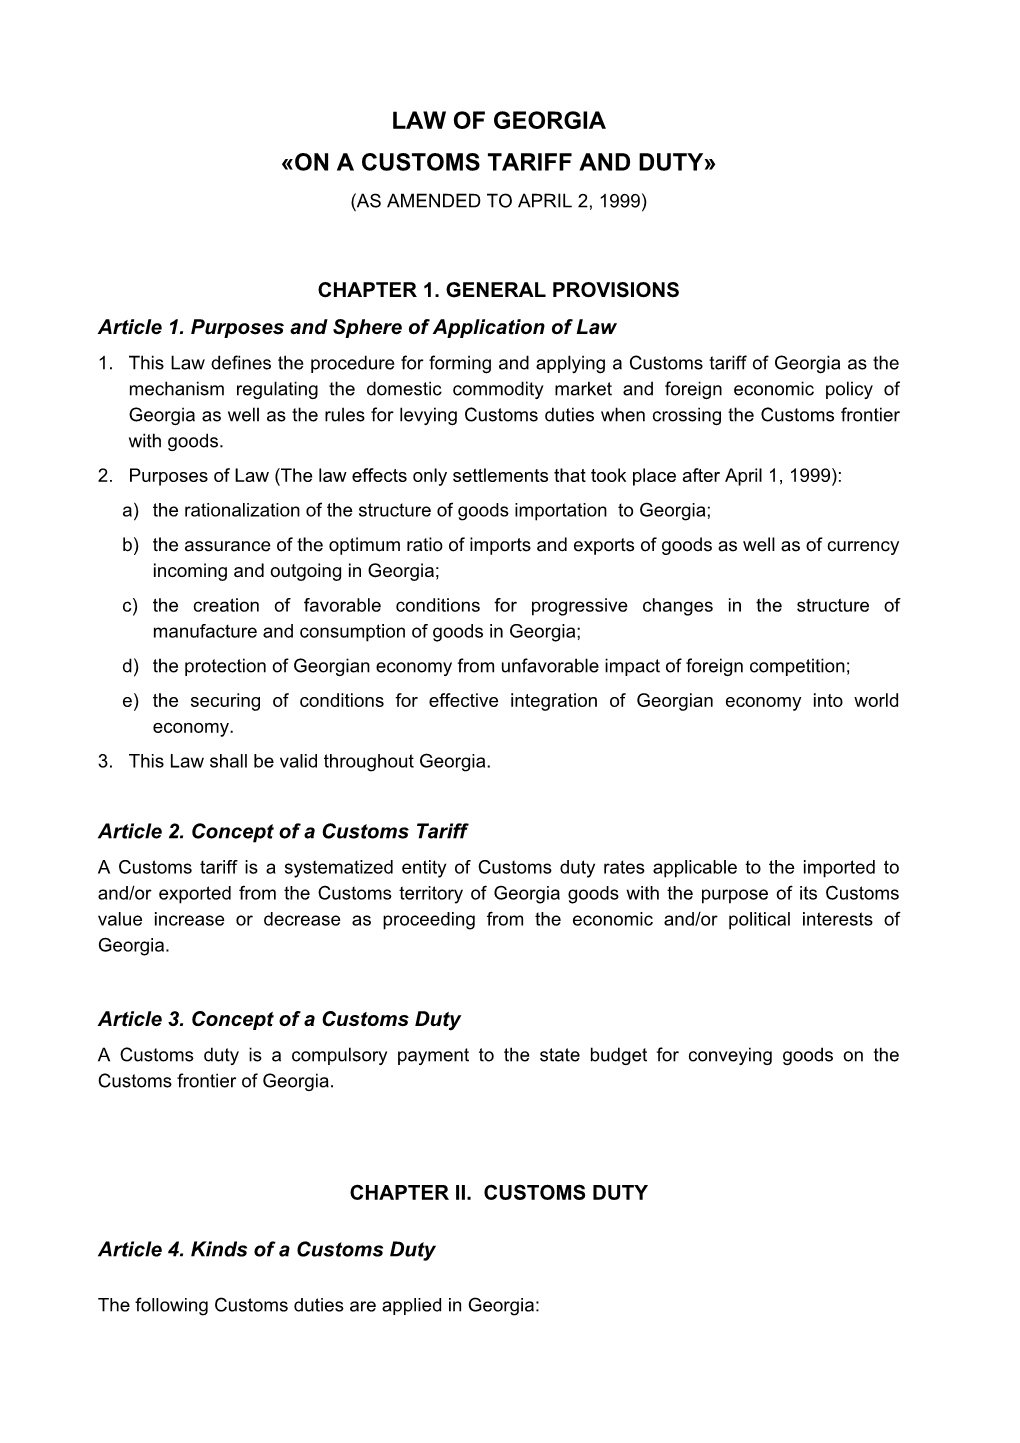 Law of Georgia «On a Customs Tariff and Duty» (As Amended to April 2, 1999)